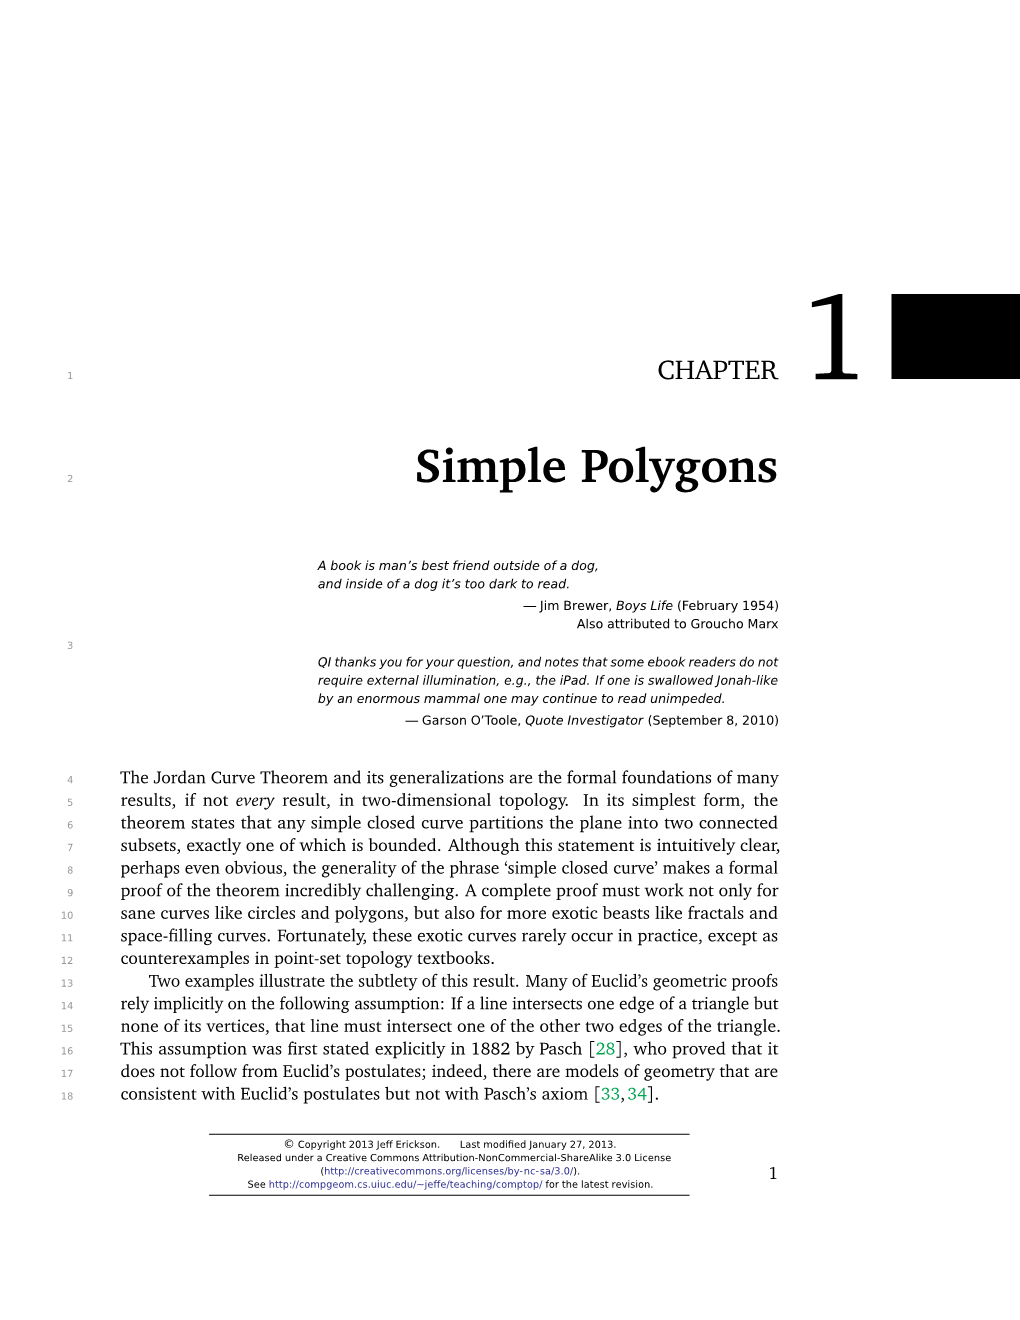 Simple Polygons